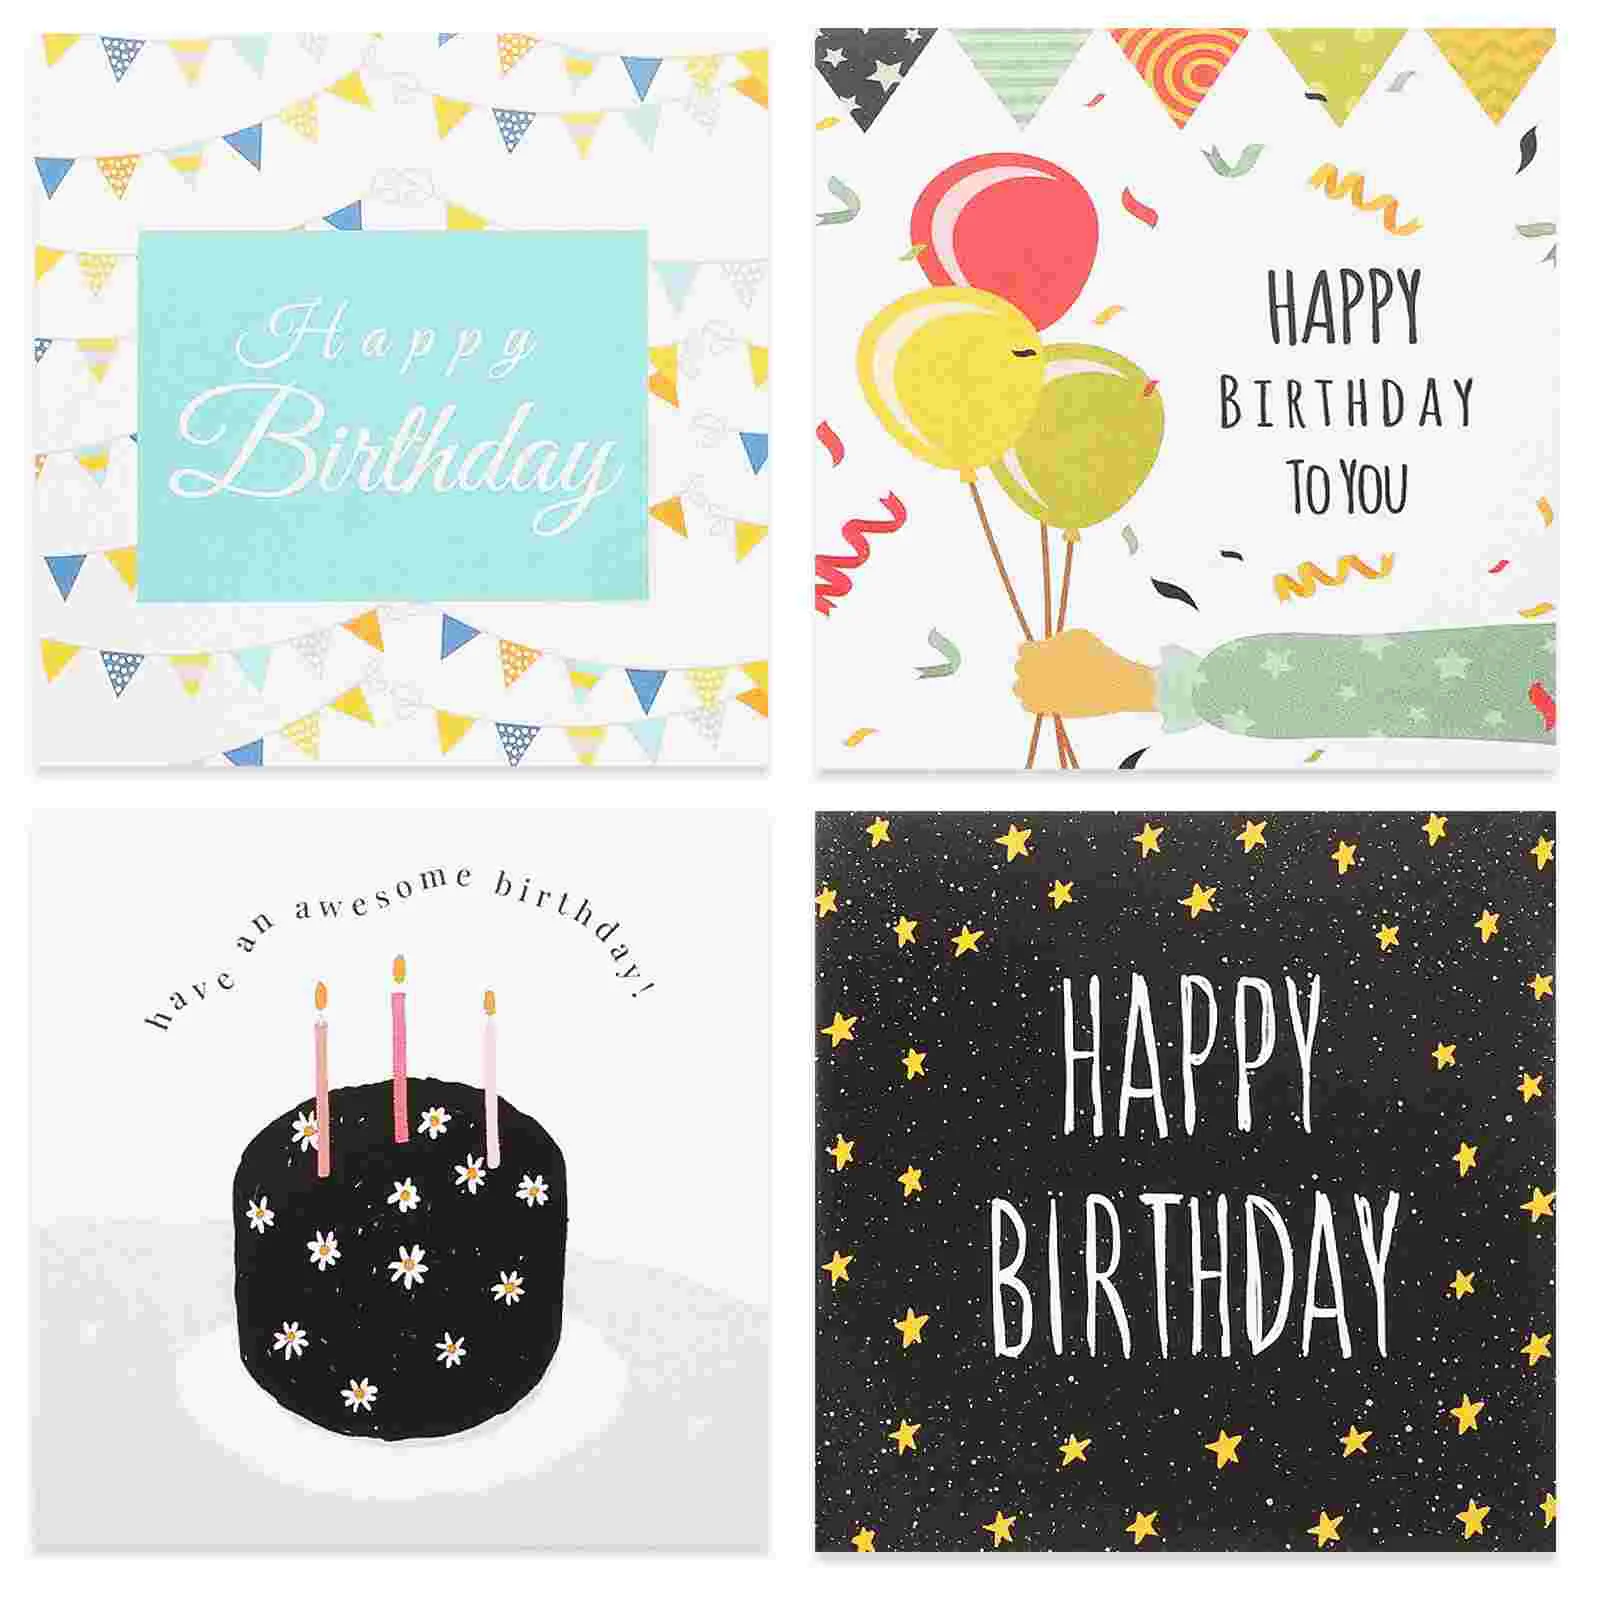 

120 Pcs Birthday Card Greeting Cards Happy Mom Assortment Bulk Assorted Coated Paper Her Boyfriend Mother